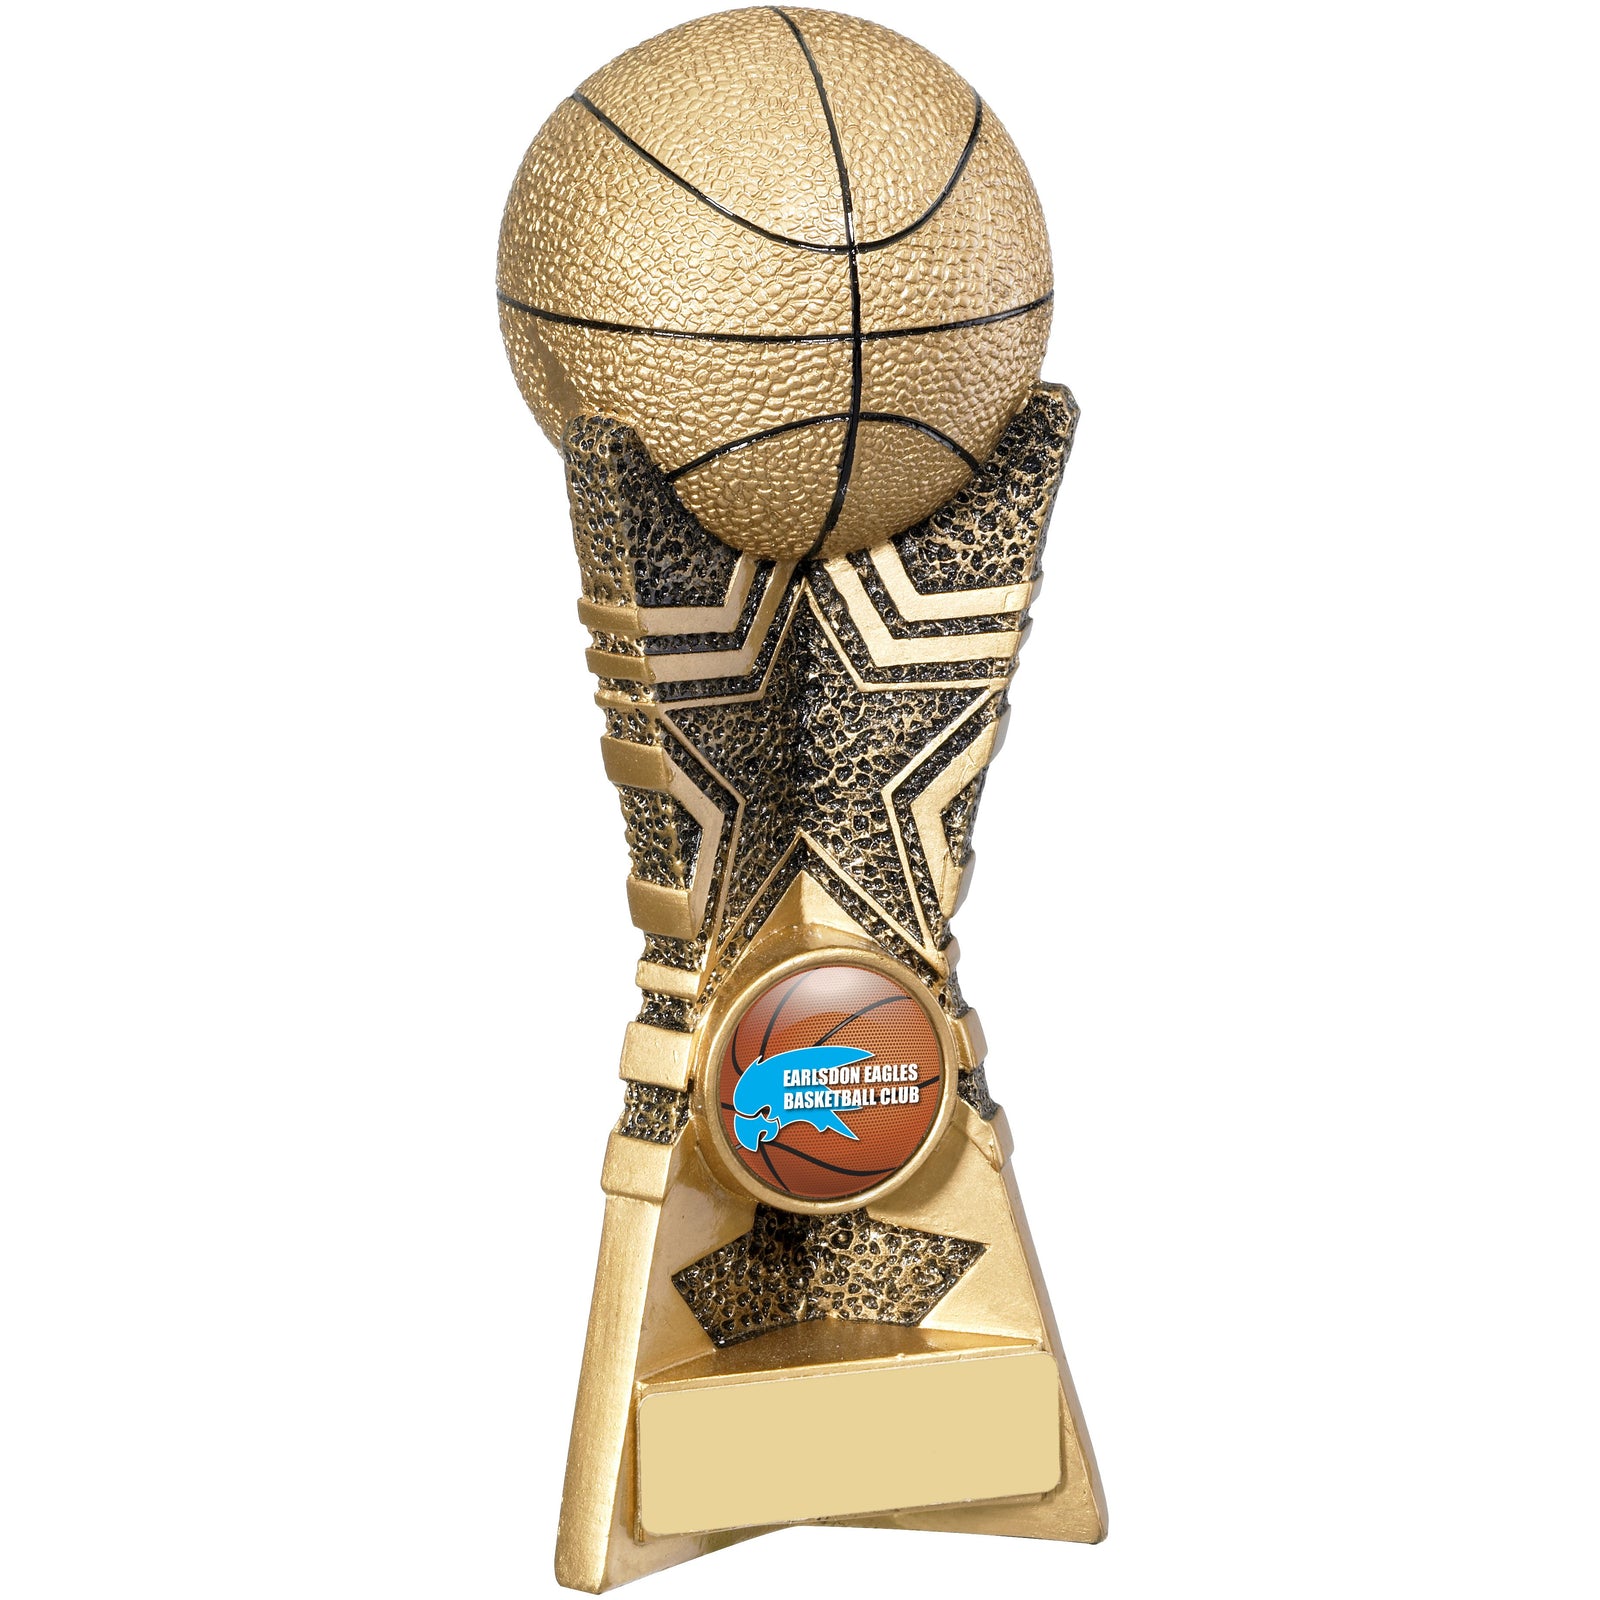 Basketball Statue Trophy - Gold